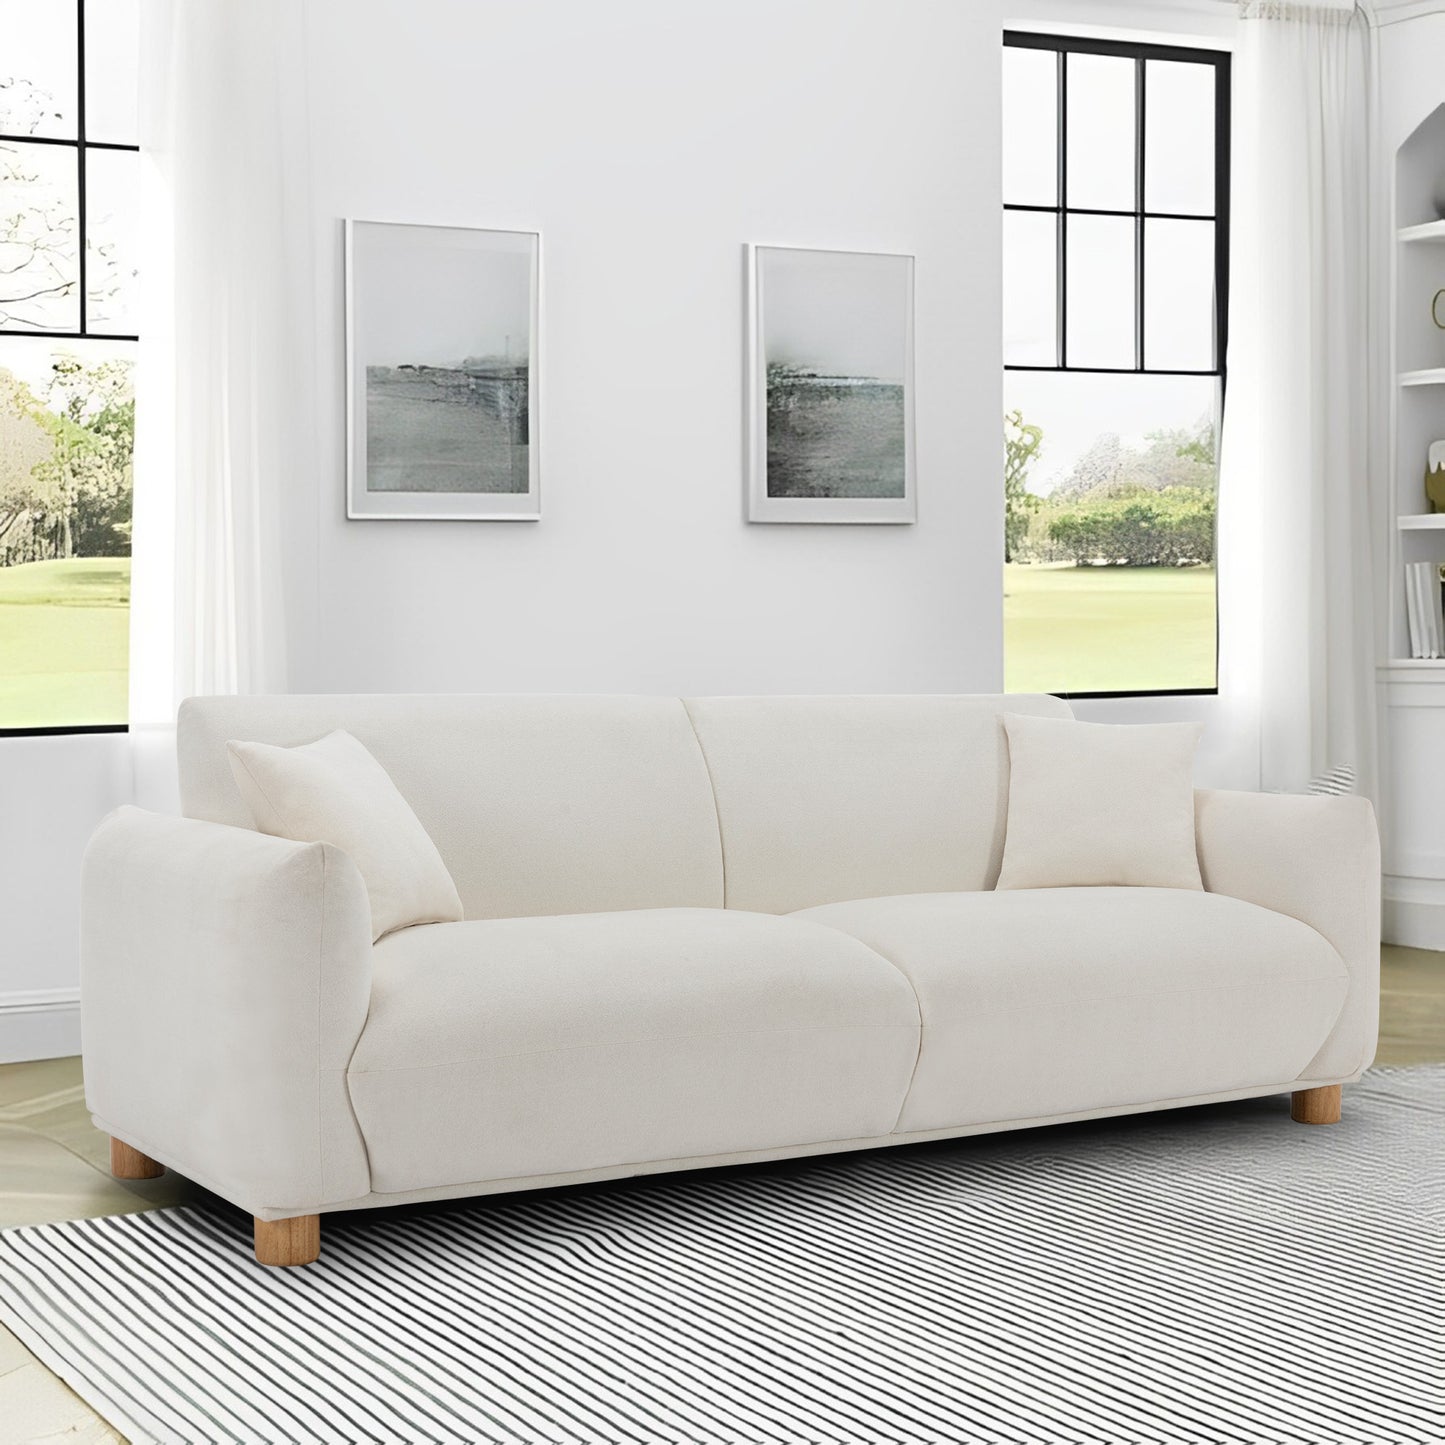 COLAMY 91.34" Beige Color Fabric Sofa Love Seat Modern Comfy Sofa Couch